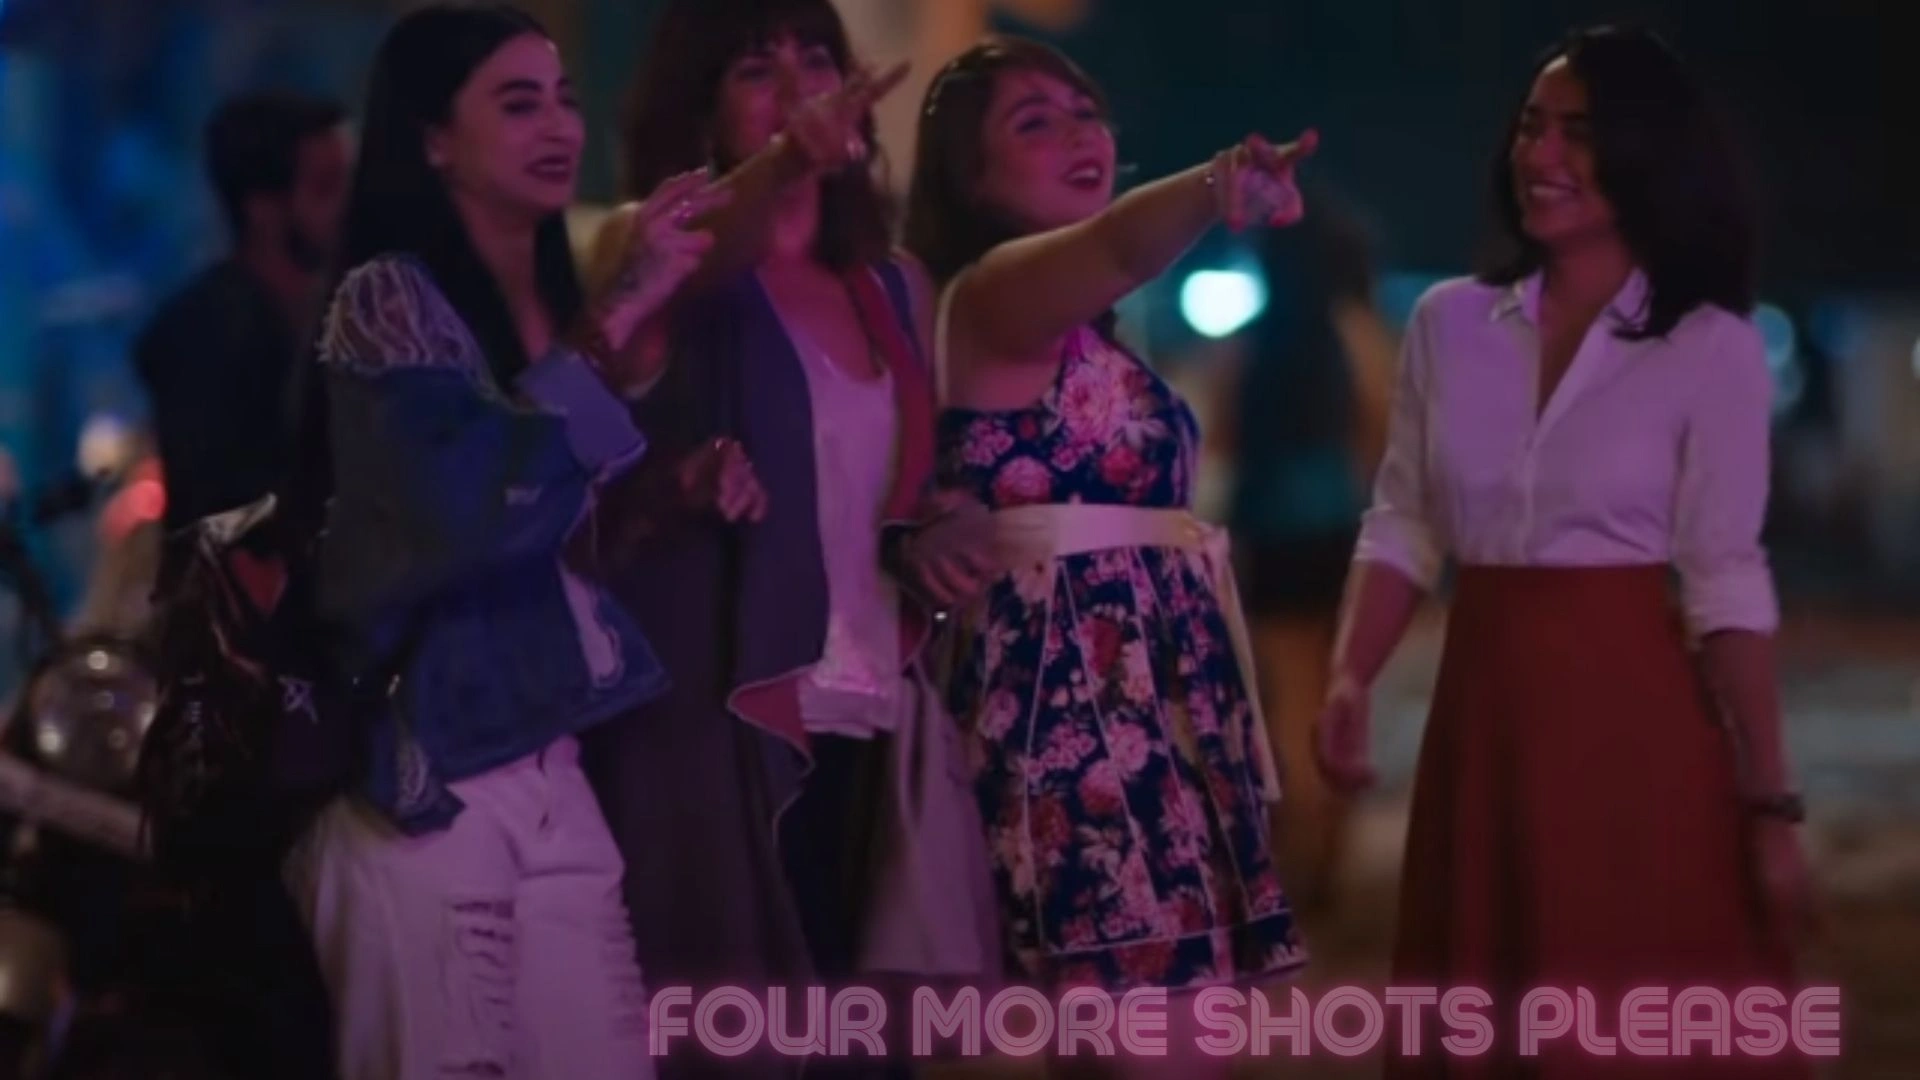 Four More Shots Please Parents Guide and Age Rating (2022)